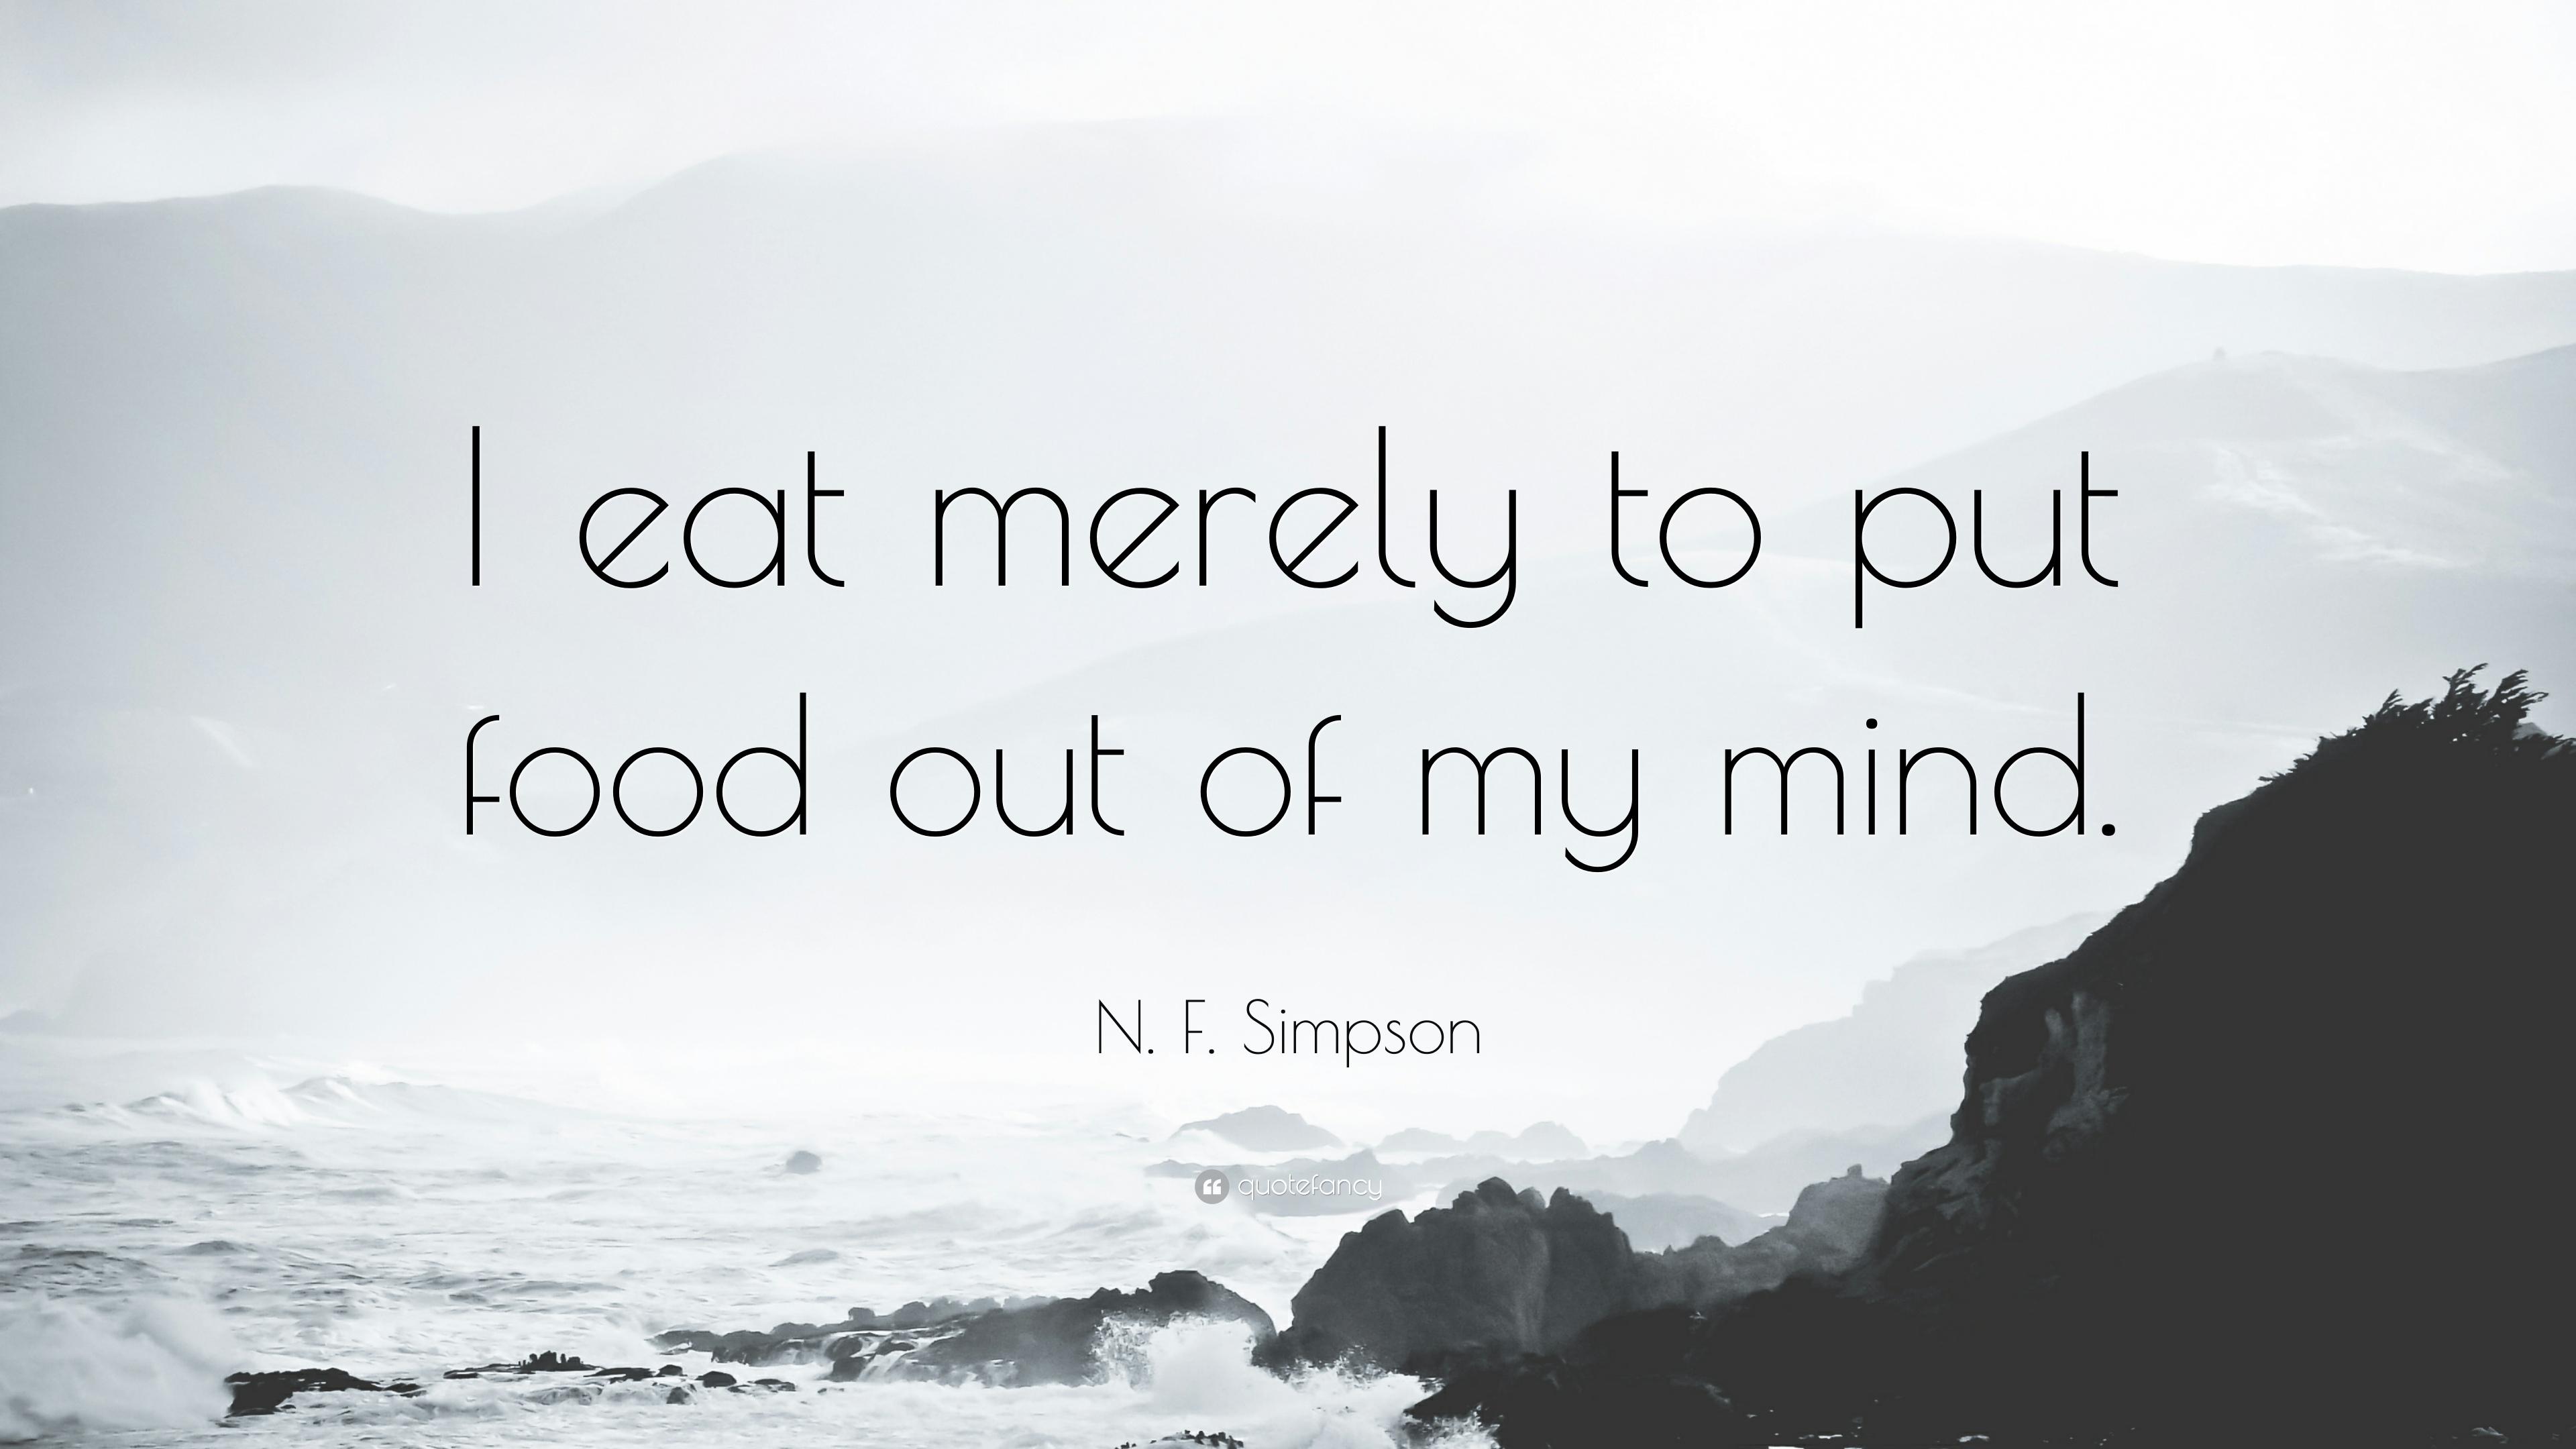 N. F. Simpson Quote: “I eat merely to put food out of my